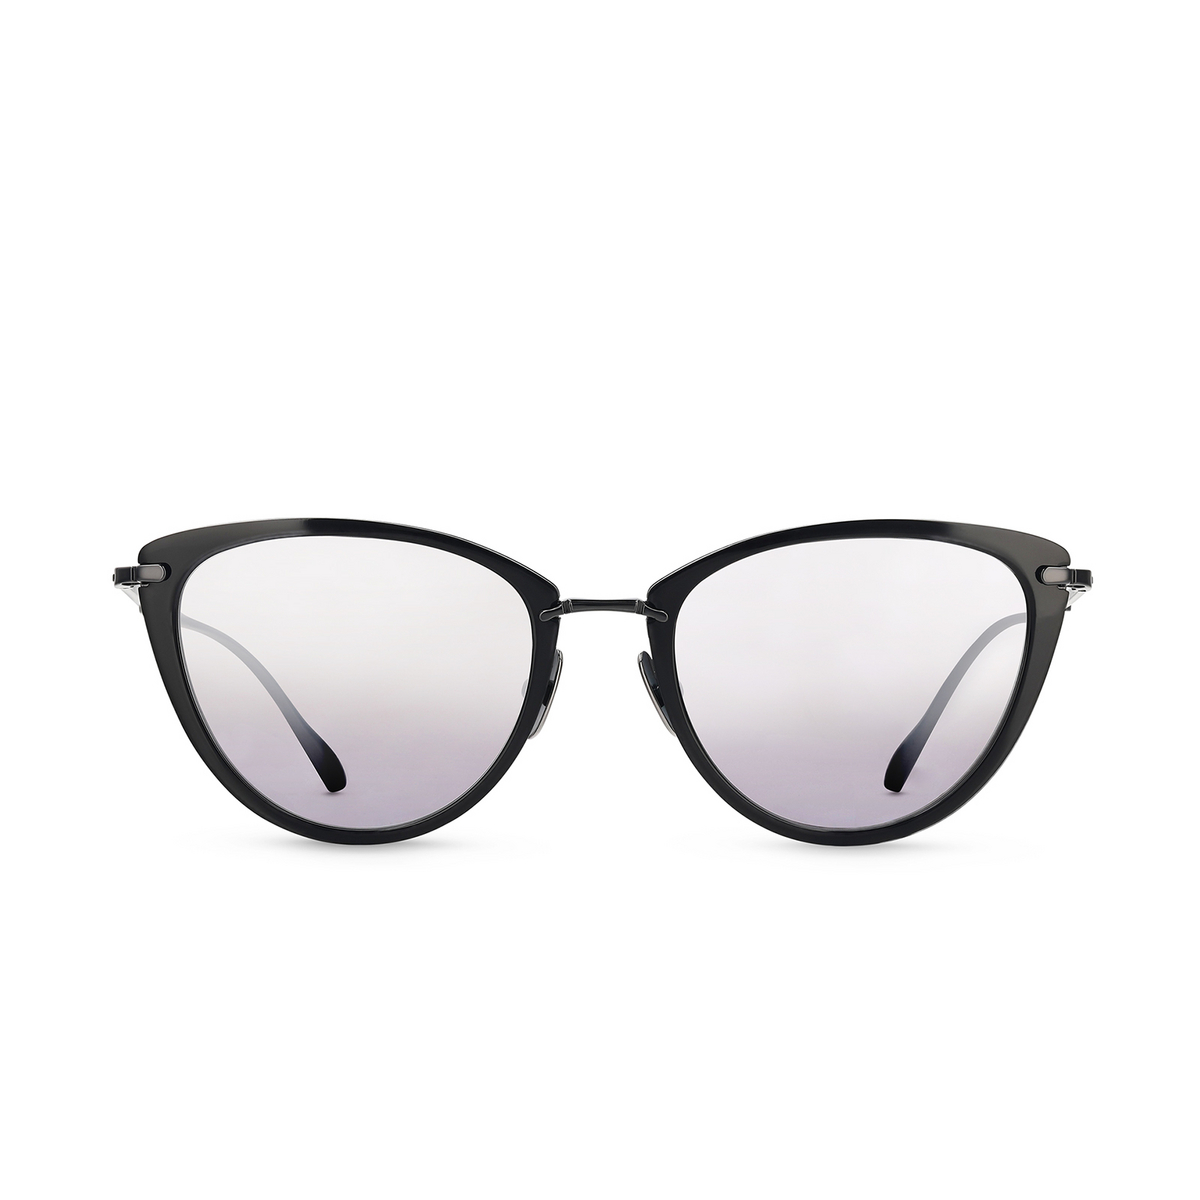 Mr. Leight BEVERLY S Sunglasses BK-SBK/SF - front view